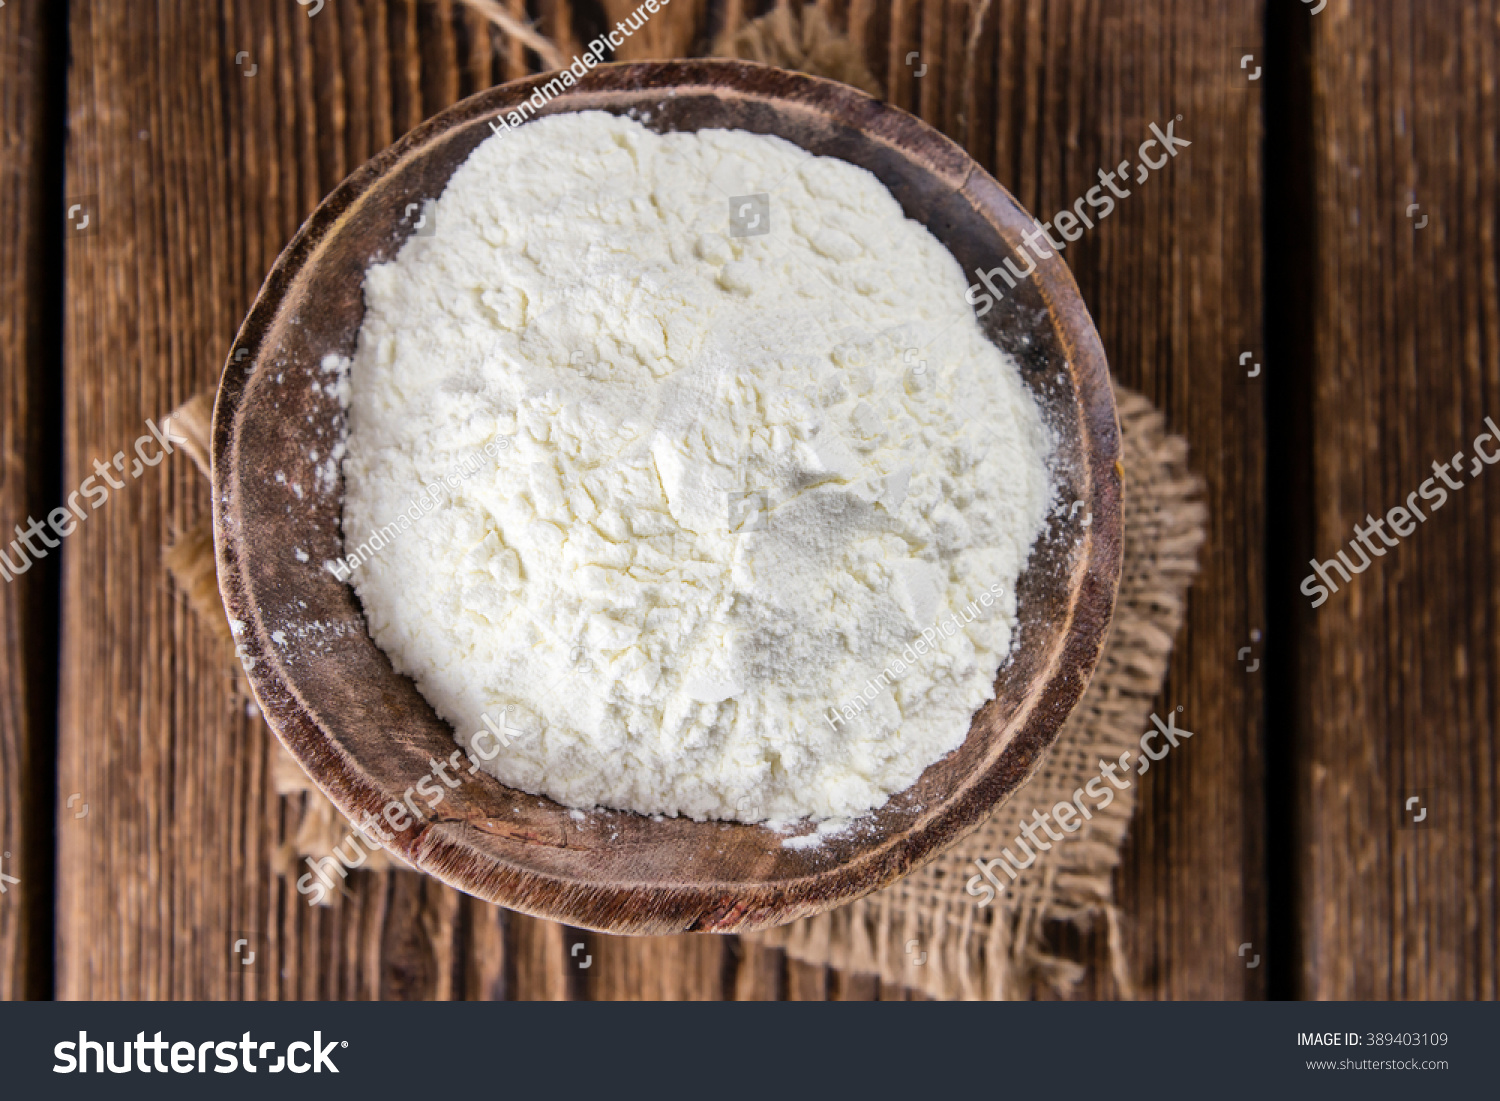 Portion of Milk Powder (selective focus) on an old wooden table #389403109